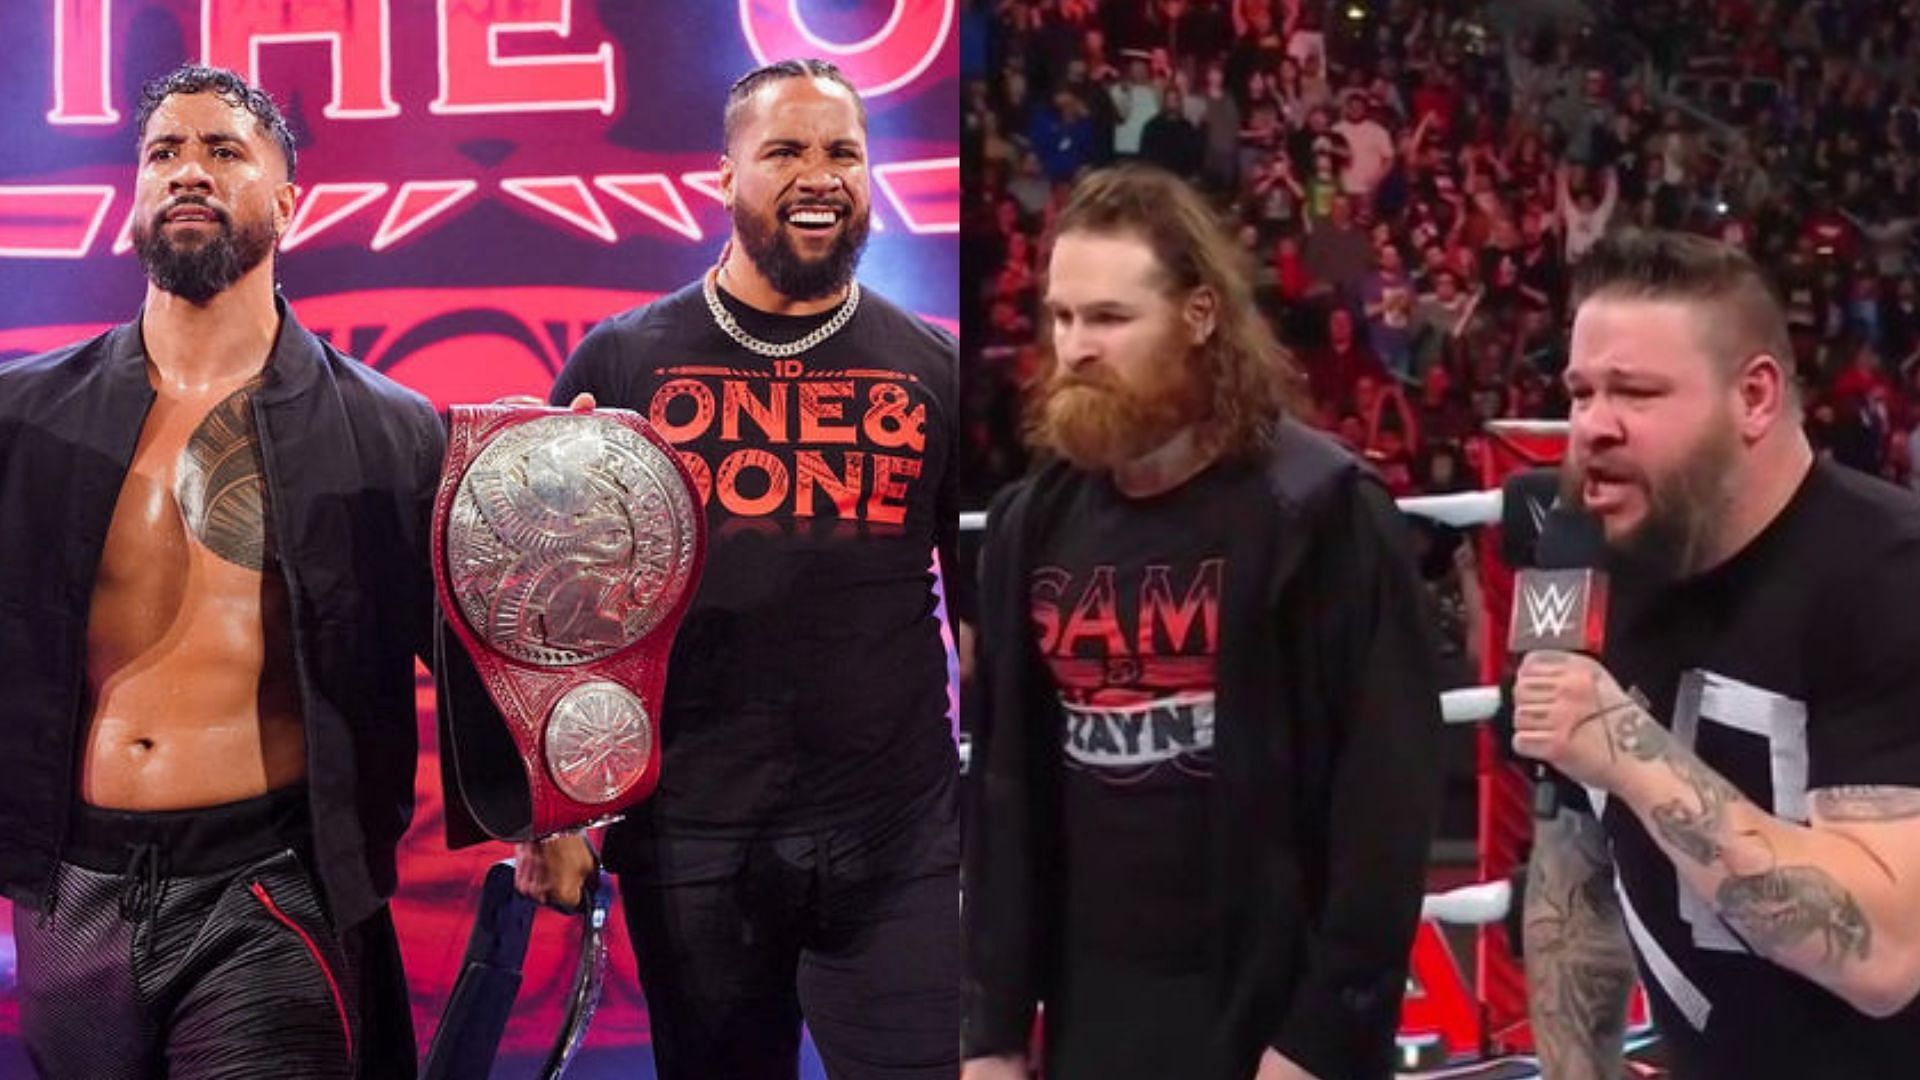 Kevin Owens and Sami Zayn will challenge for the tag titles at WrestleMania